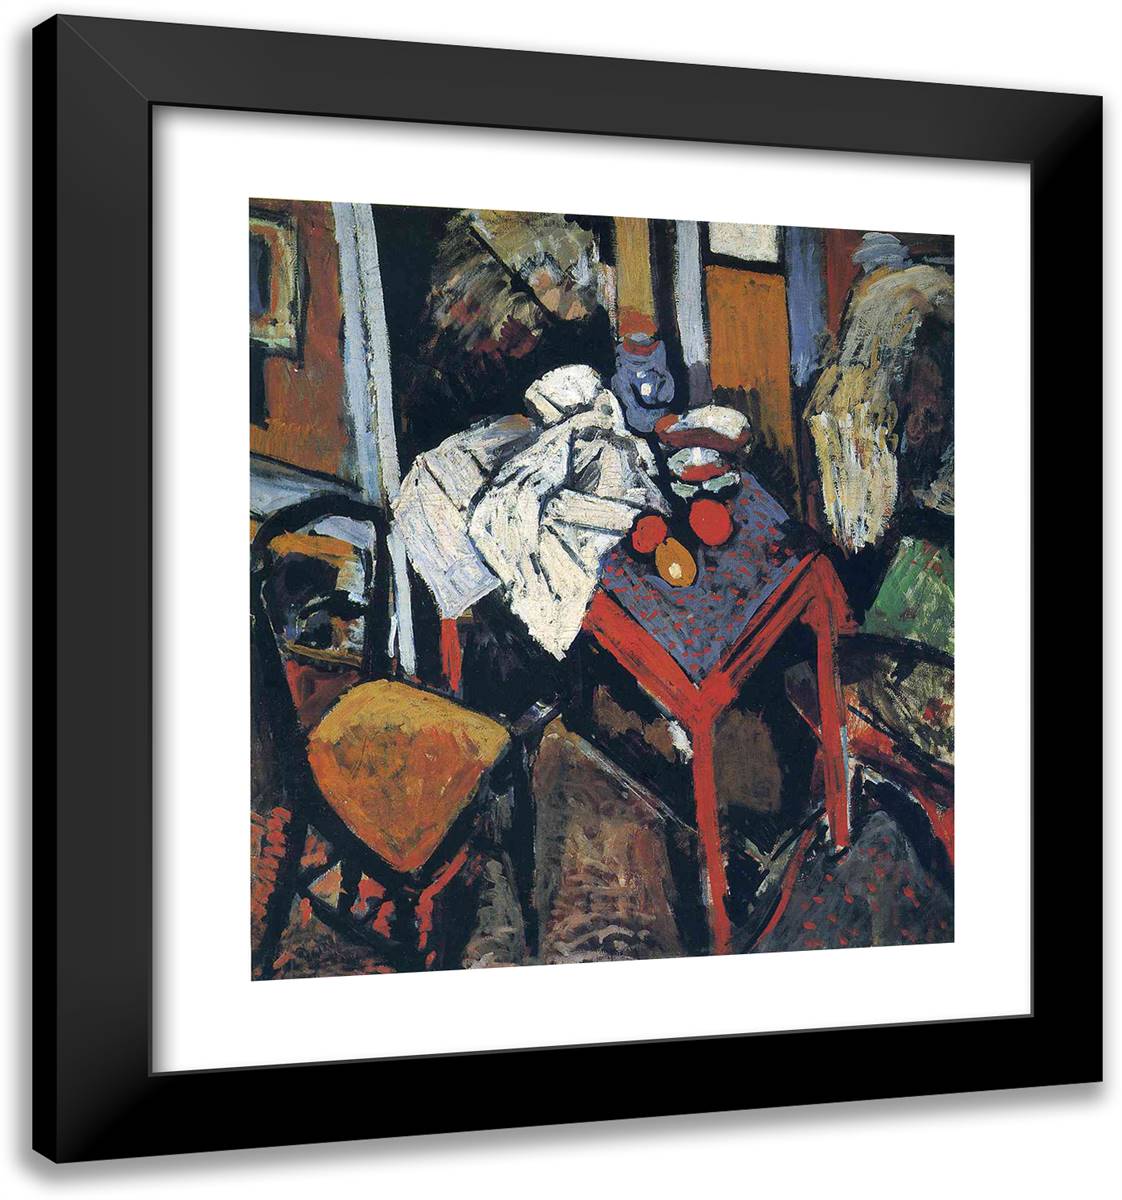 Still Life on the Red Table 20x21 Black Modern Wood Framed Art Print Poster by Derain, Andre